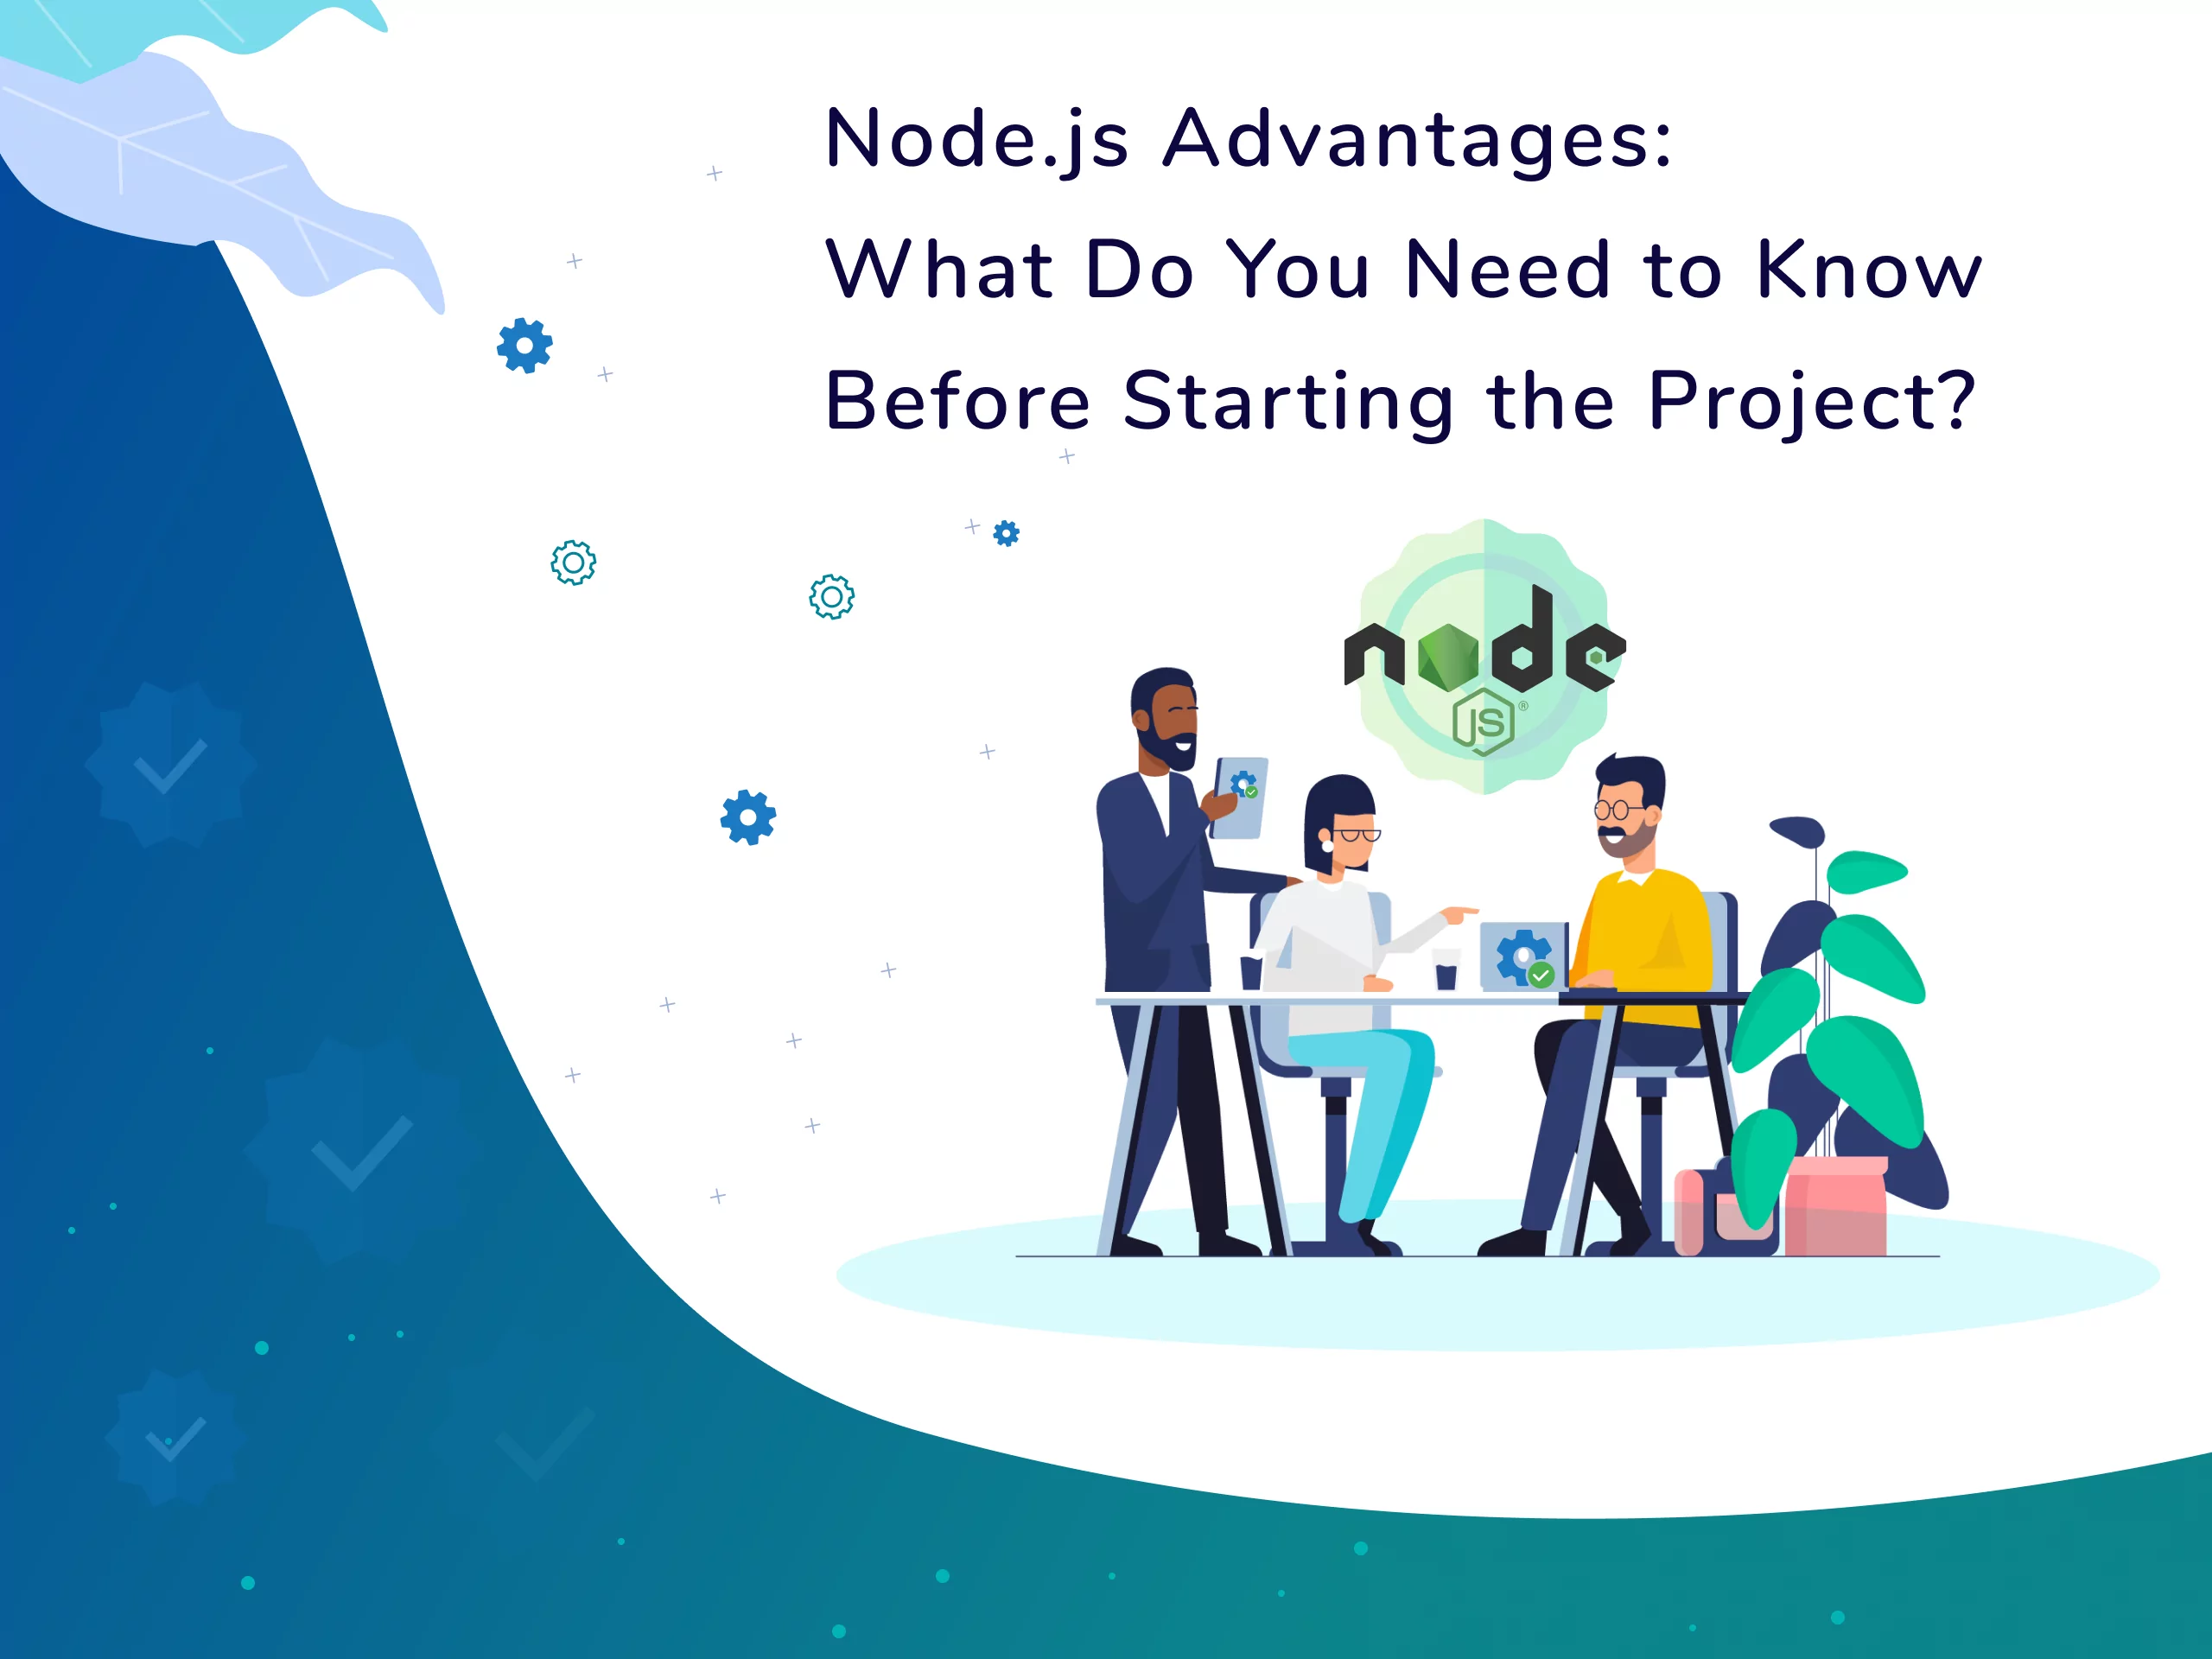 How to Benefit From Using Node.js for Your Next Project?